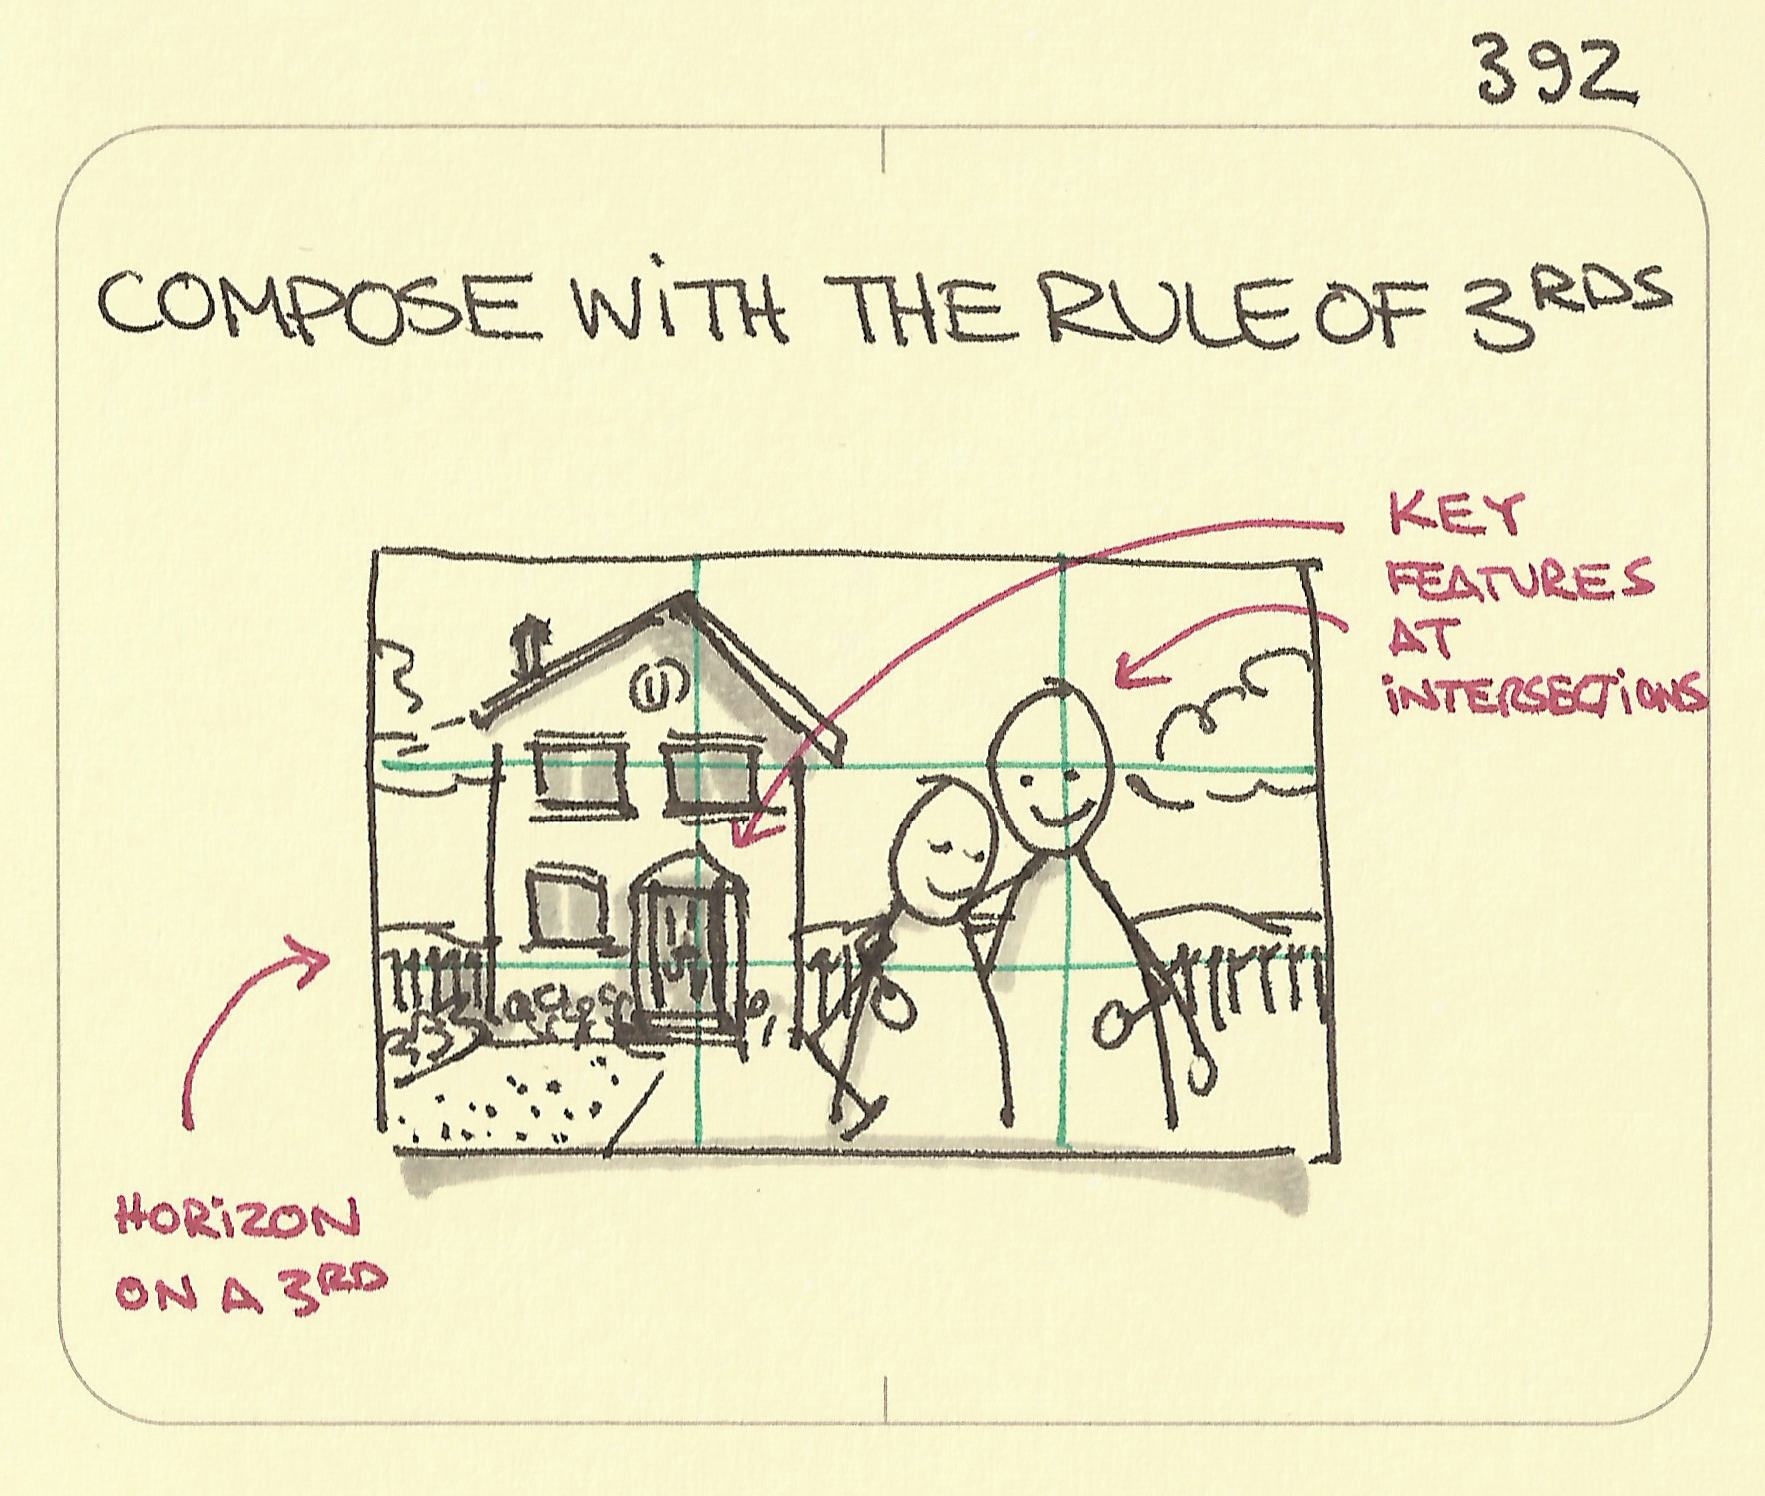 Compose with the rule of thirds - Sketchplanations